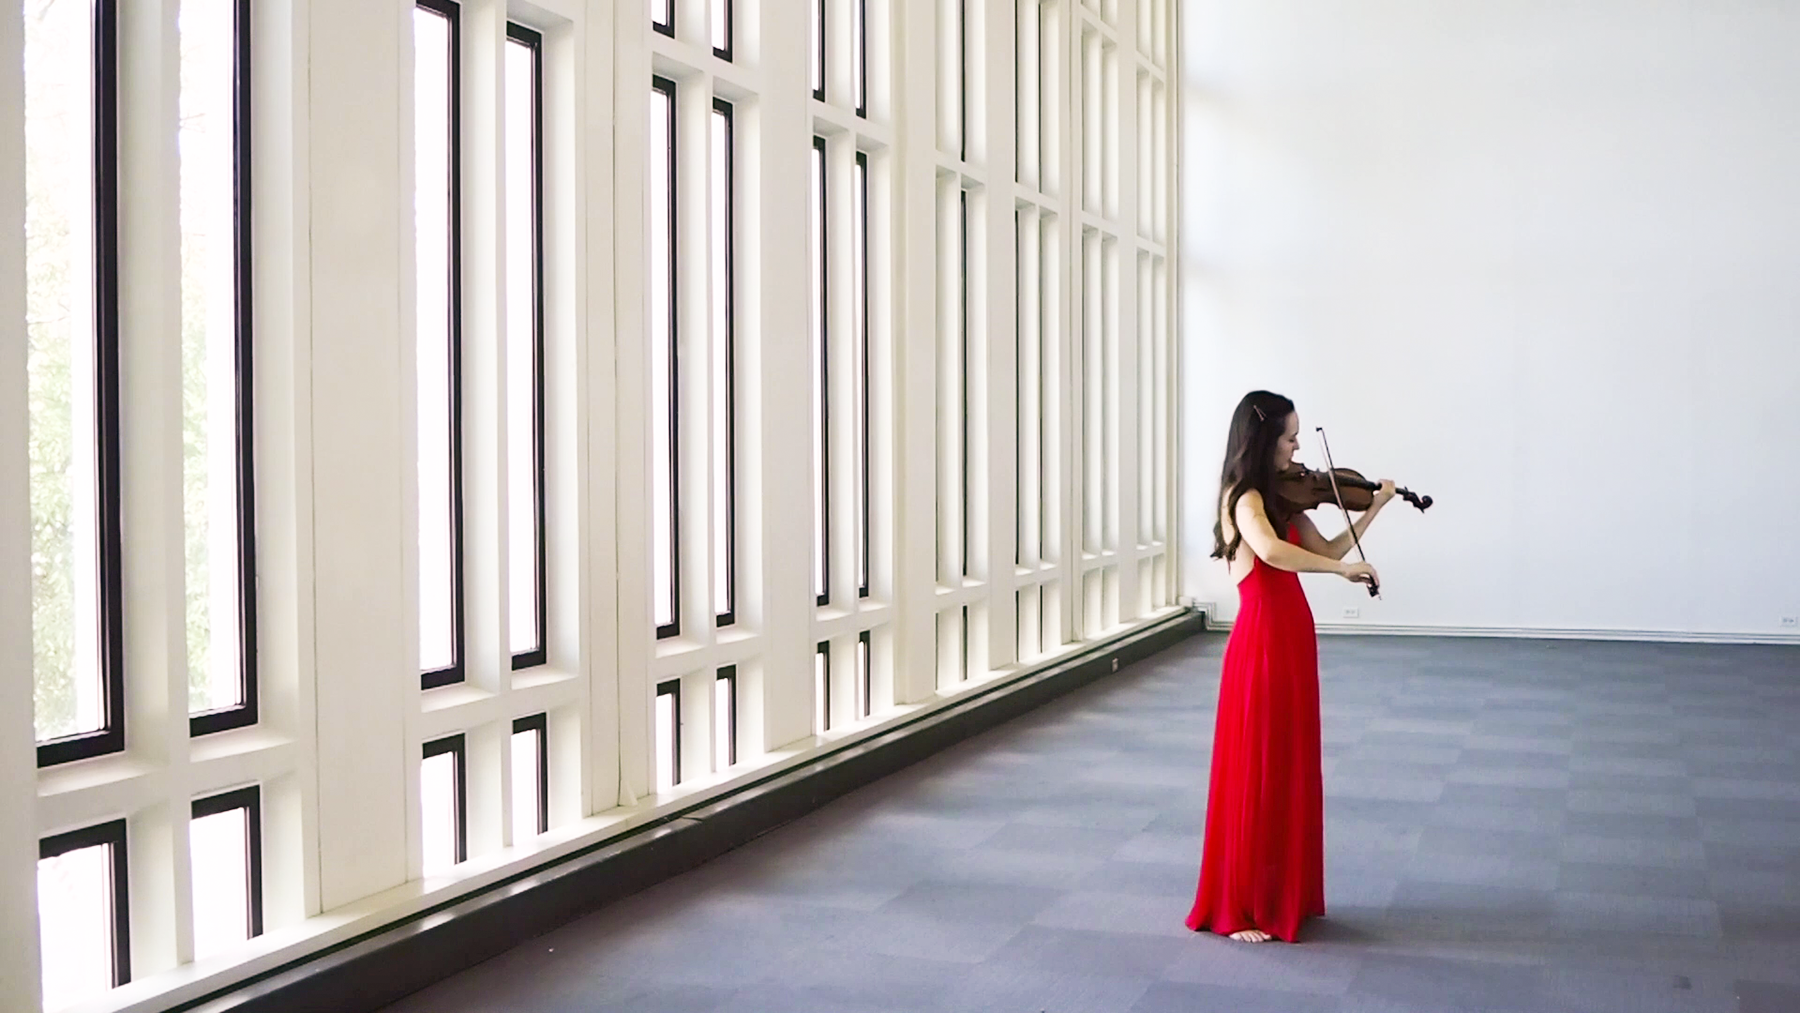 A woman in a red dress playing violin next to a bay of windows